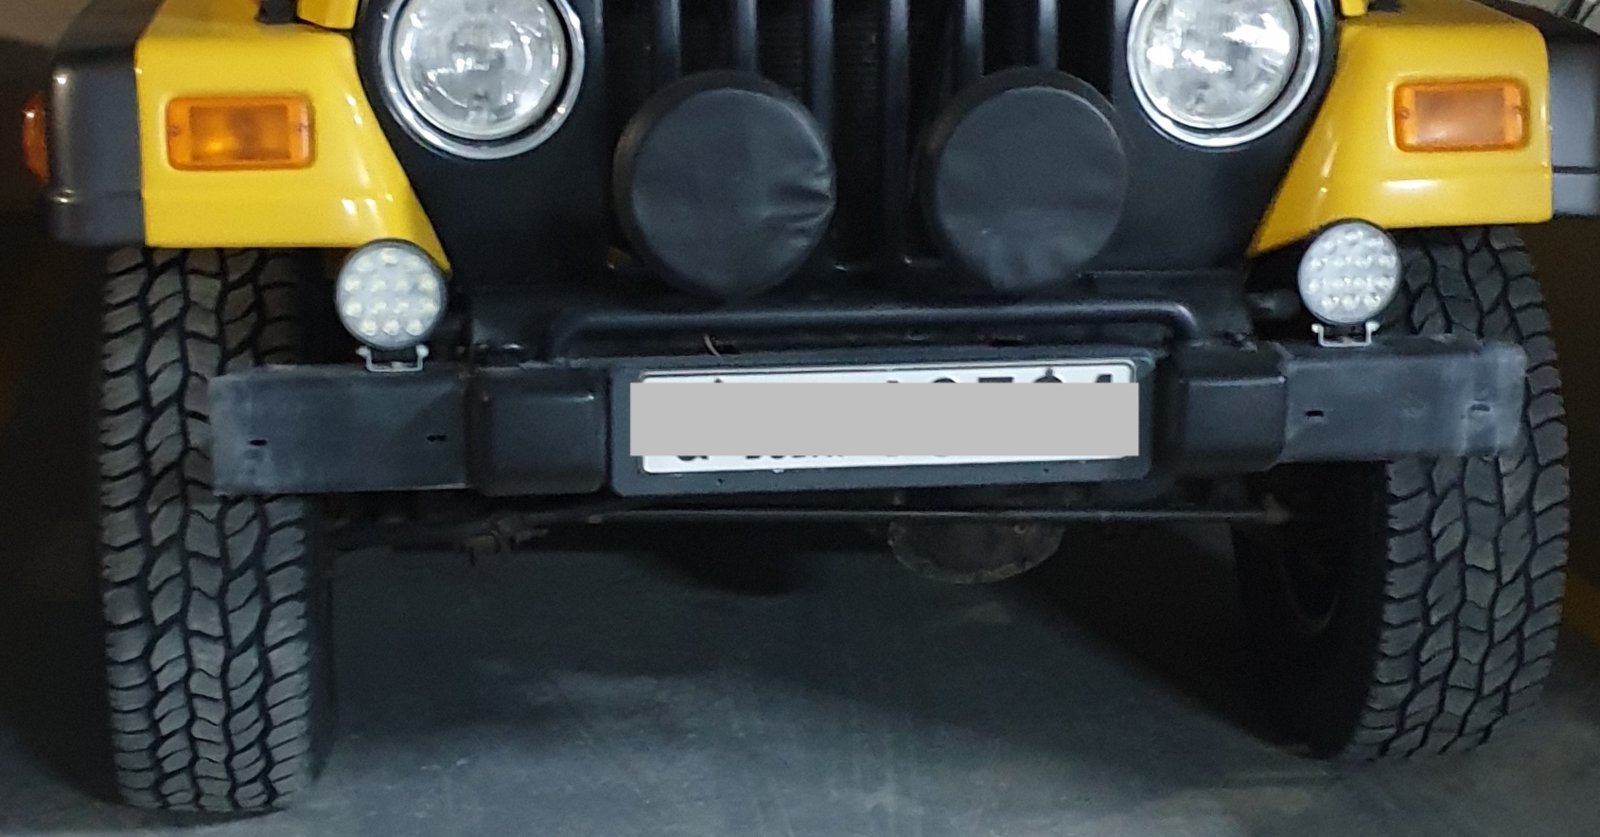 jeep front.jpg